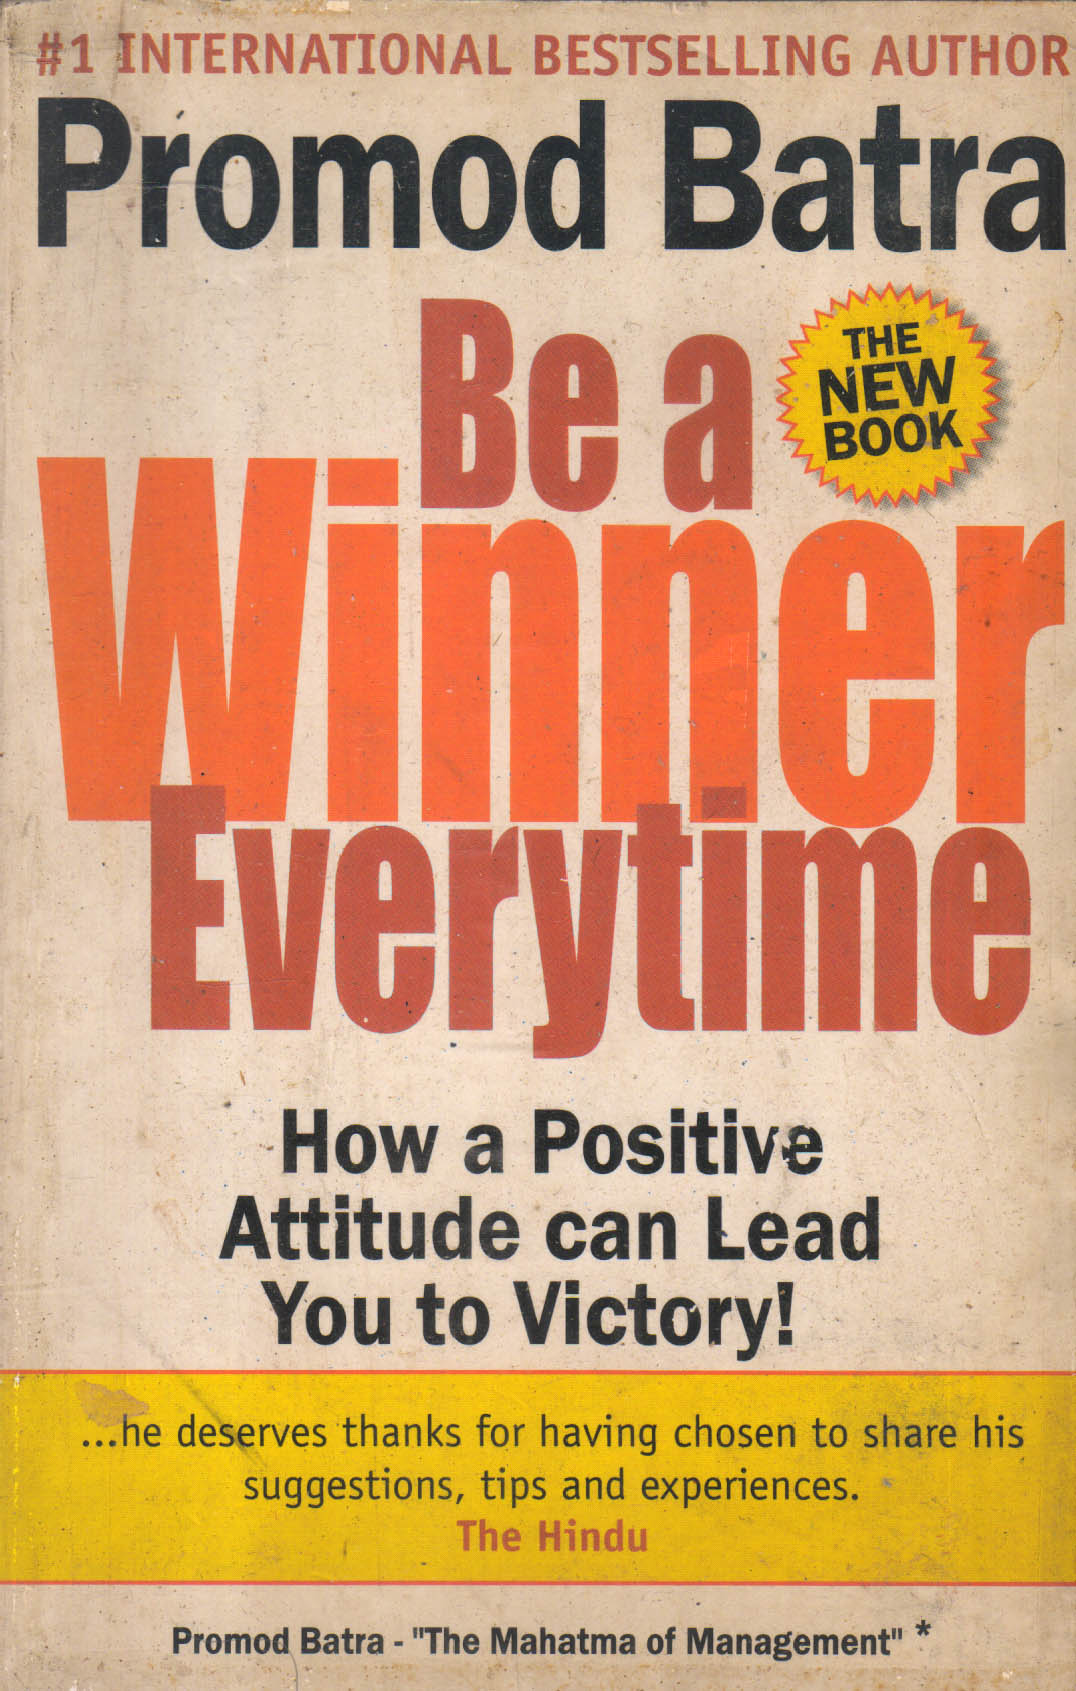 Be A Winner Everytime